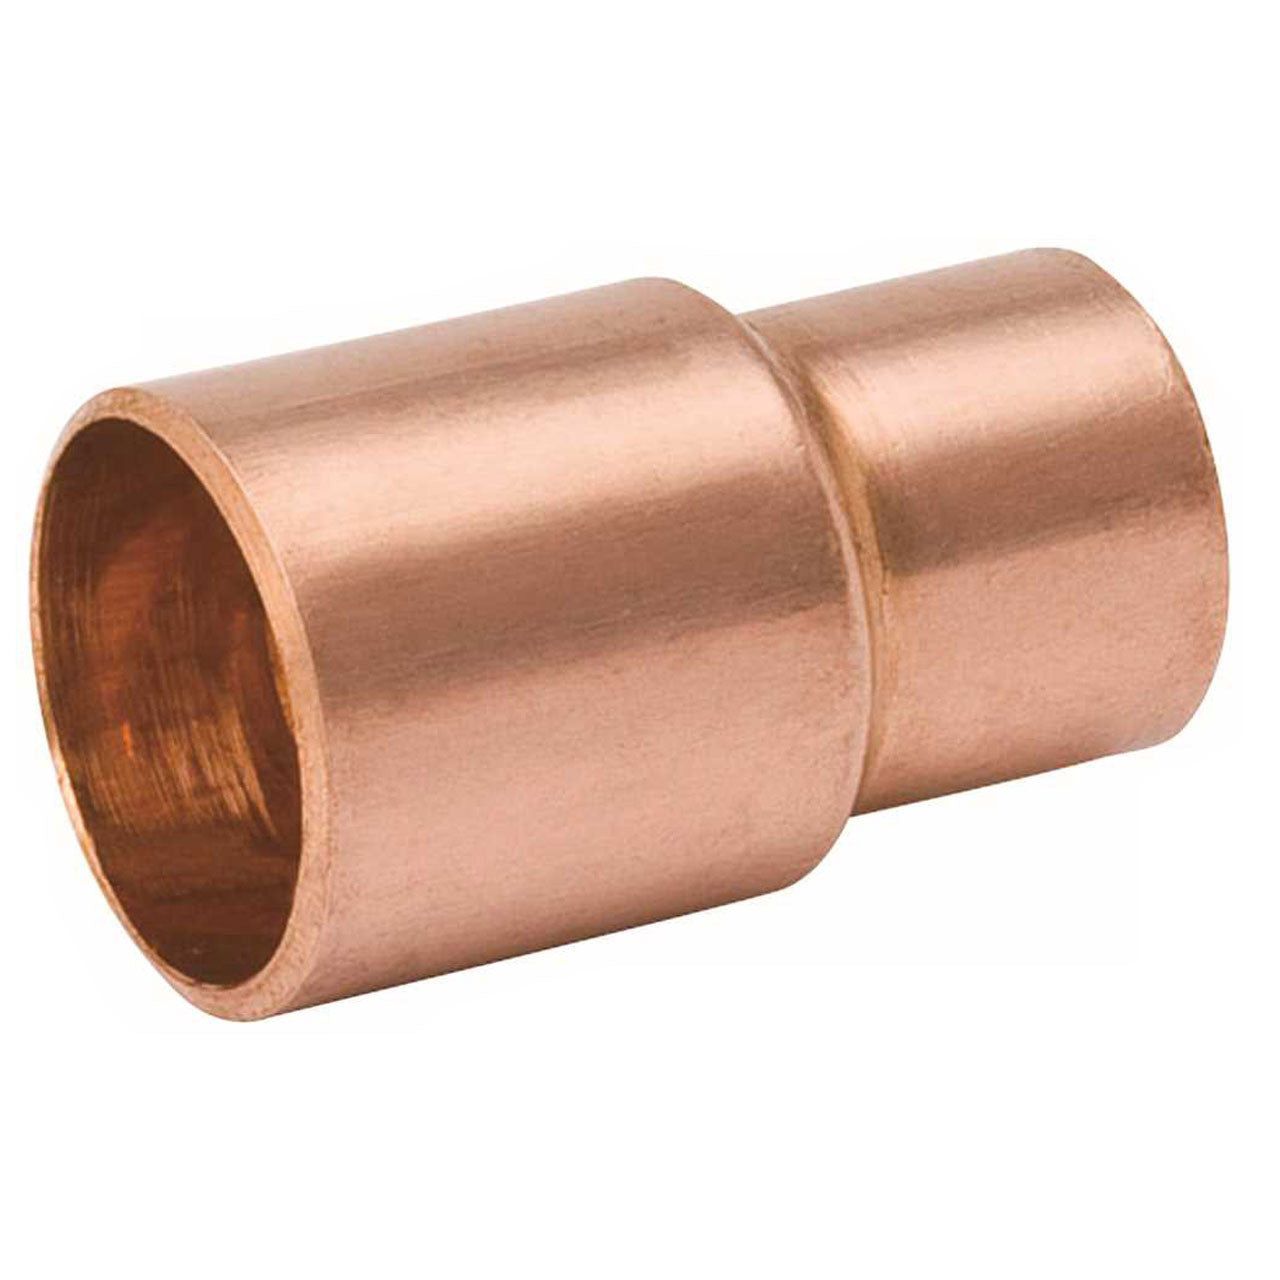 Featured Wholesale threaded socket pipe fitting For Any Piping